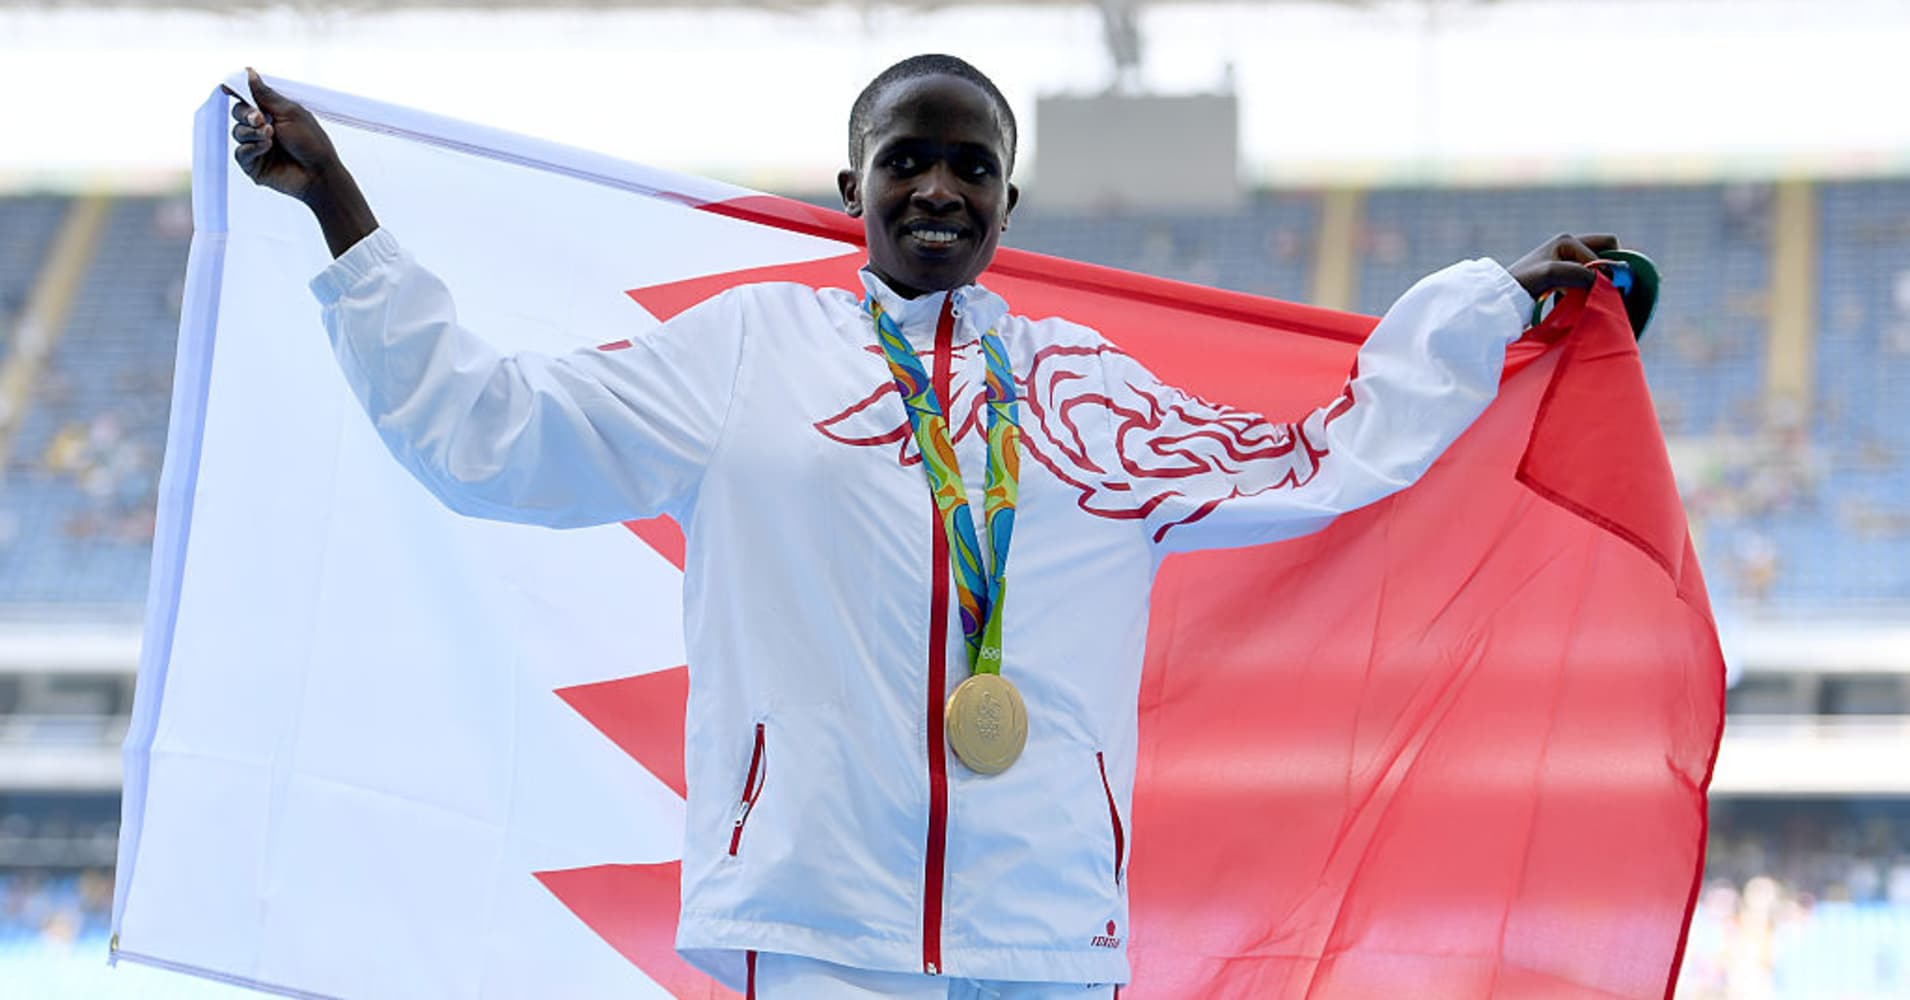 How some Middle East countries are 'buying' Olympic medals